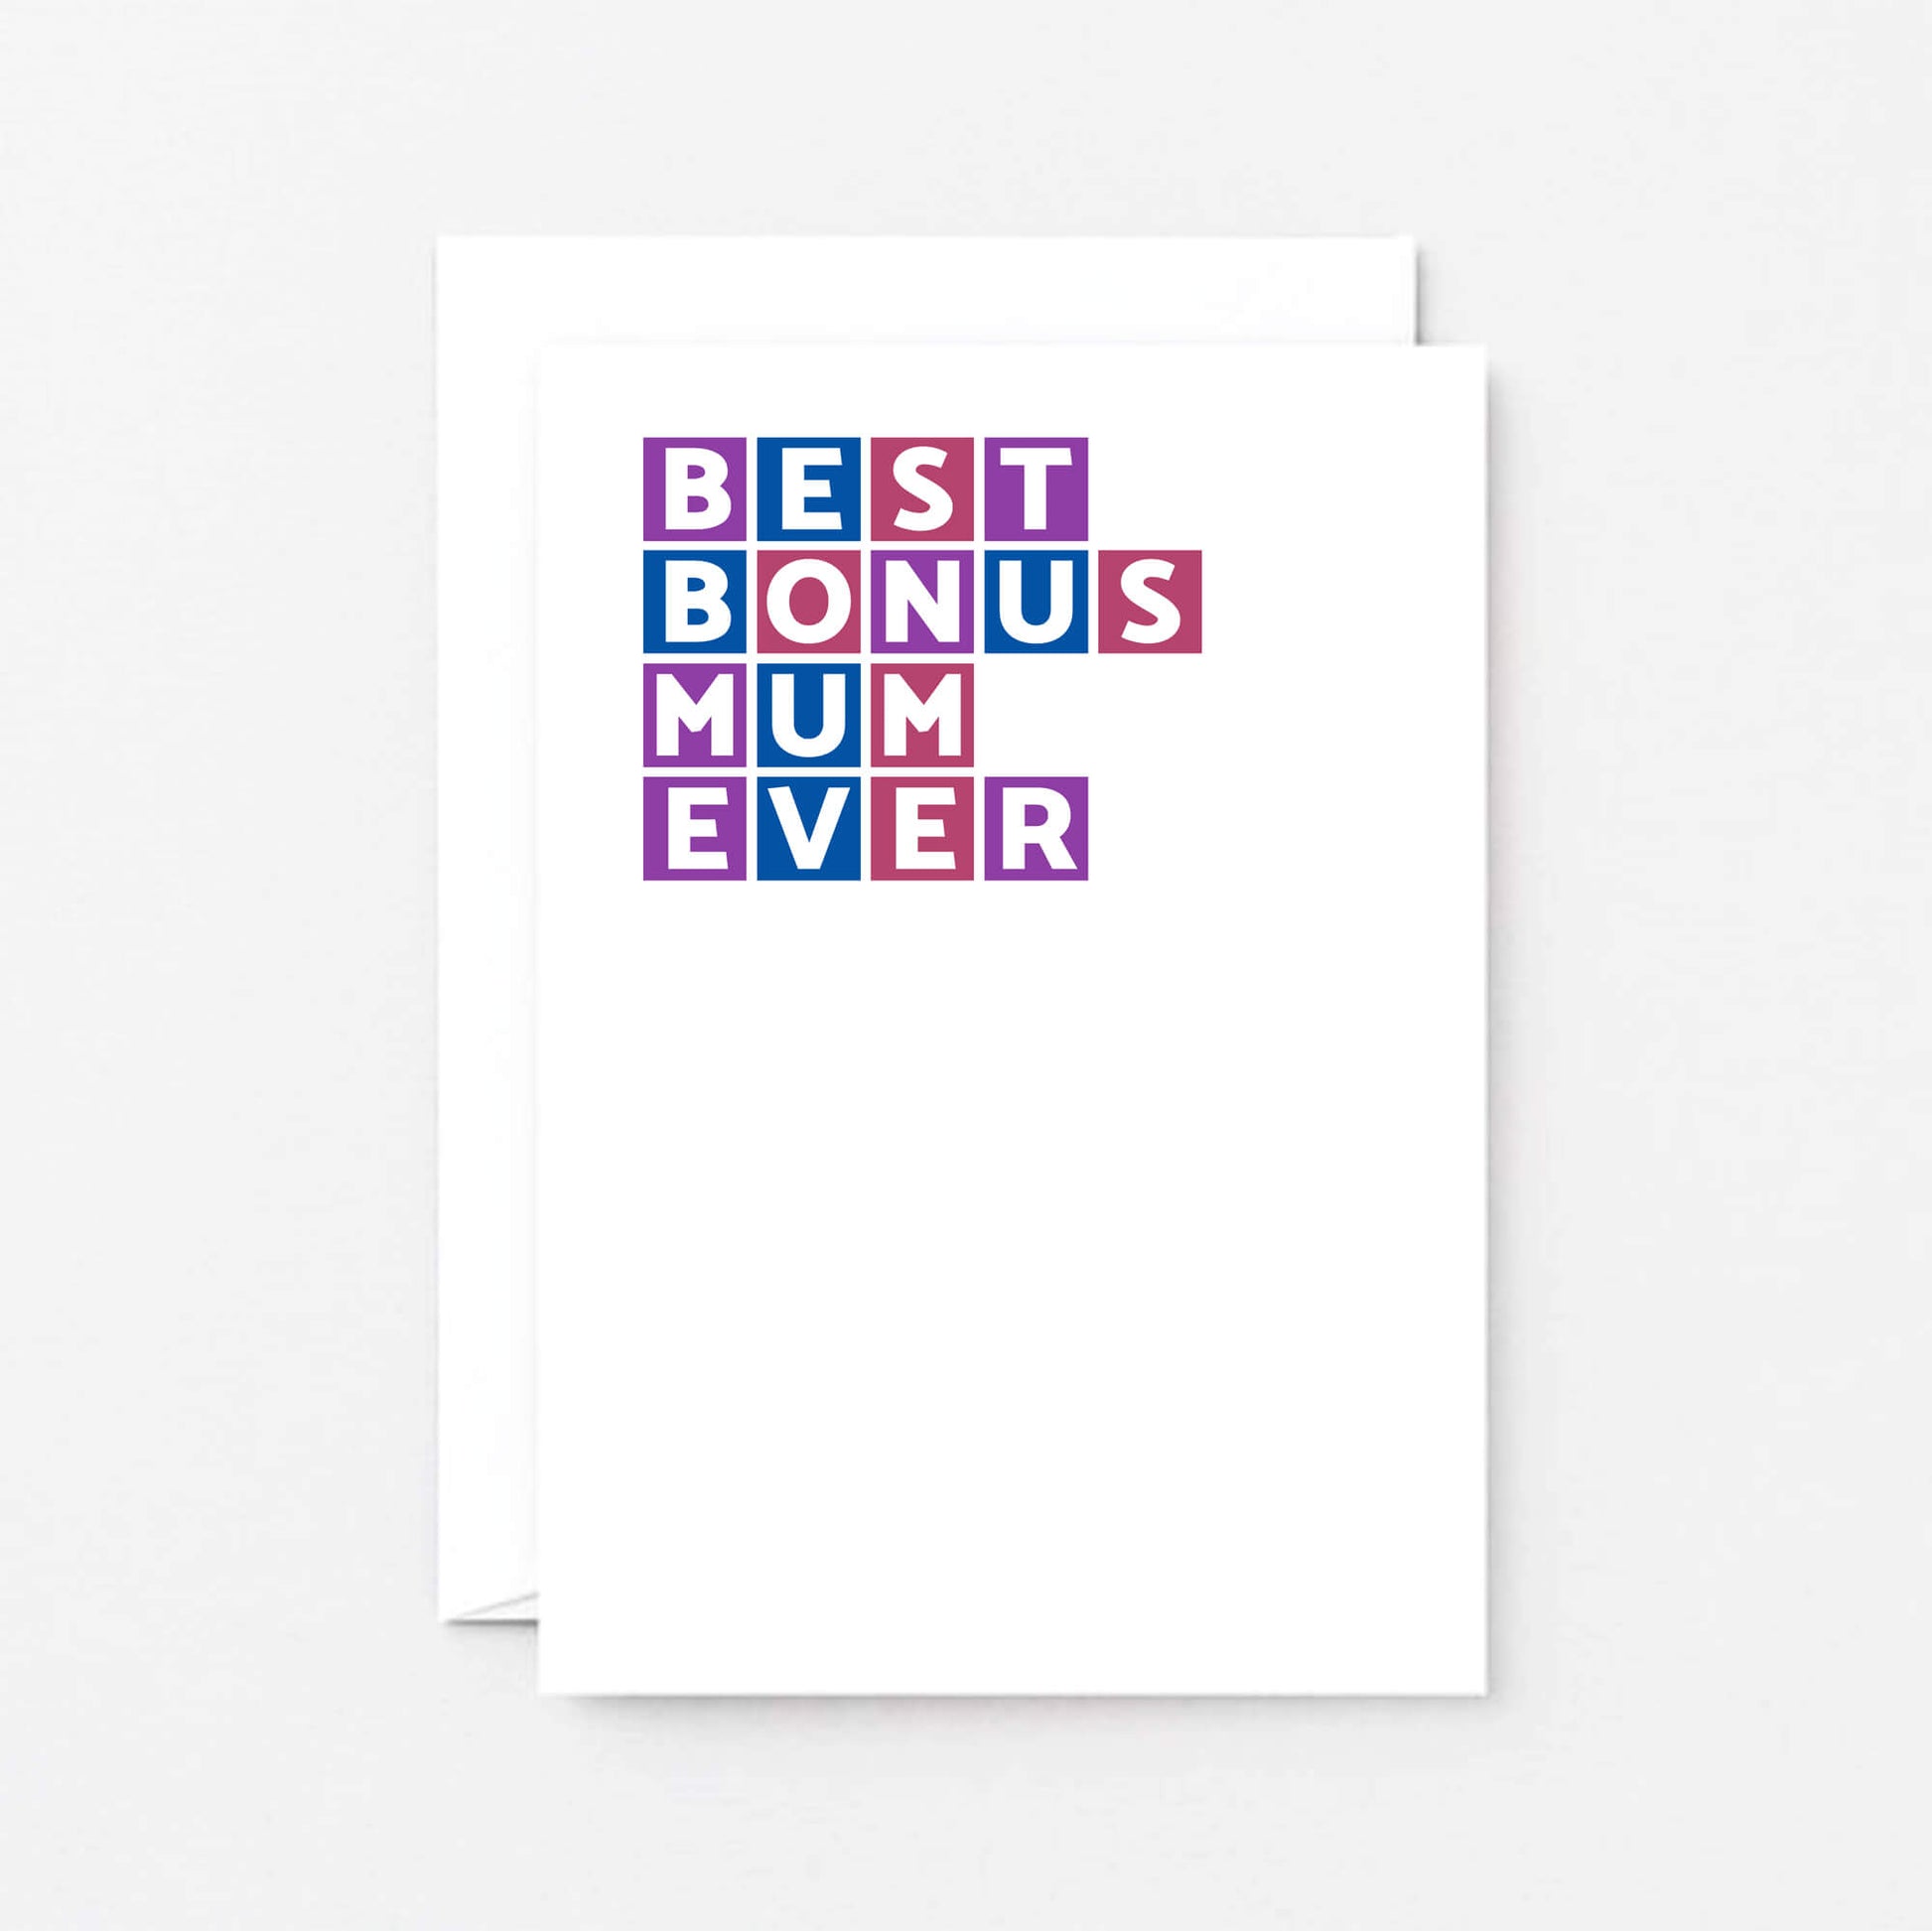 Best Bonus Mum Ever Card by SixElevenCreations. Product Code SE0328A6